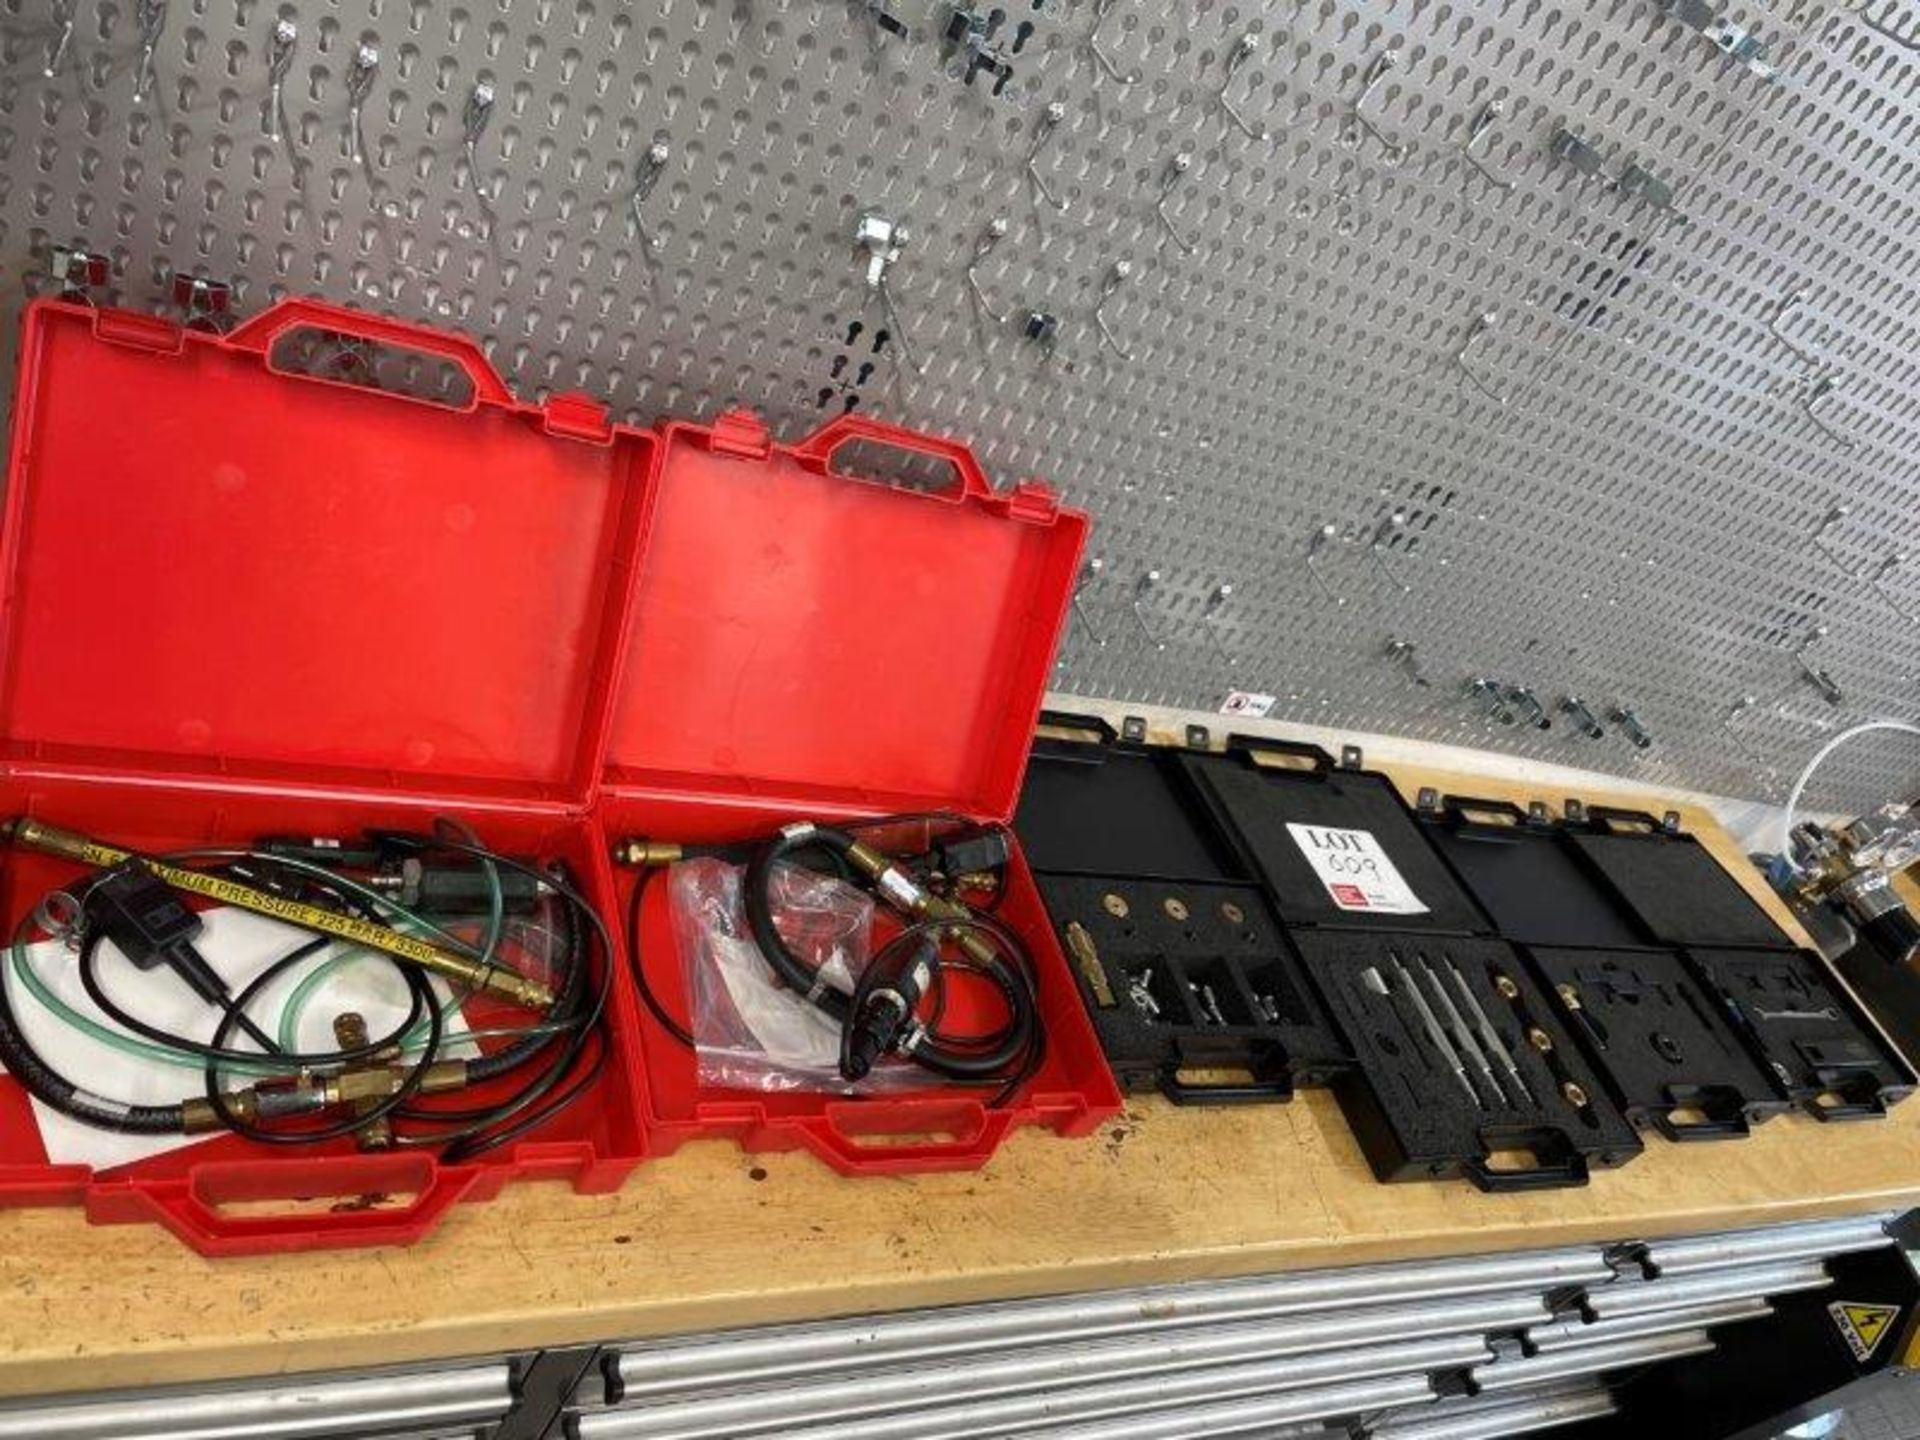 7 x Boxes and 1 x wall plate of BMW Specialist Test equipment and tools